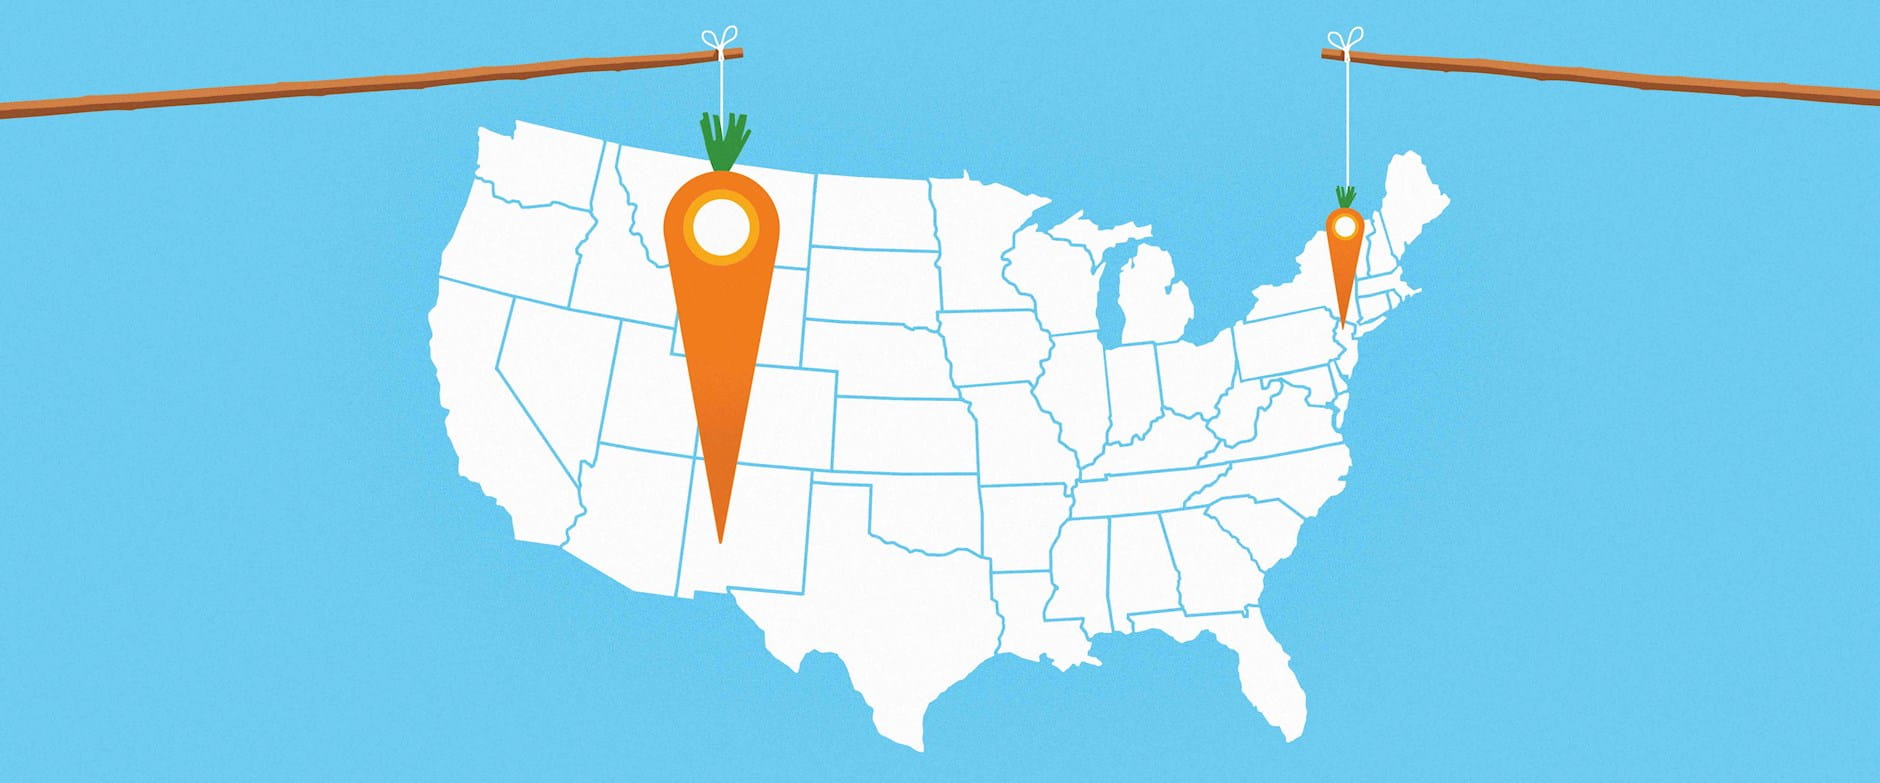 Carrots acting as pins in a map of the US